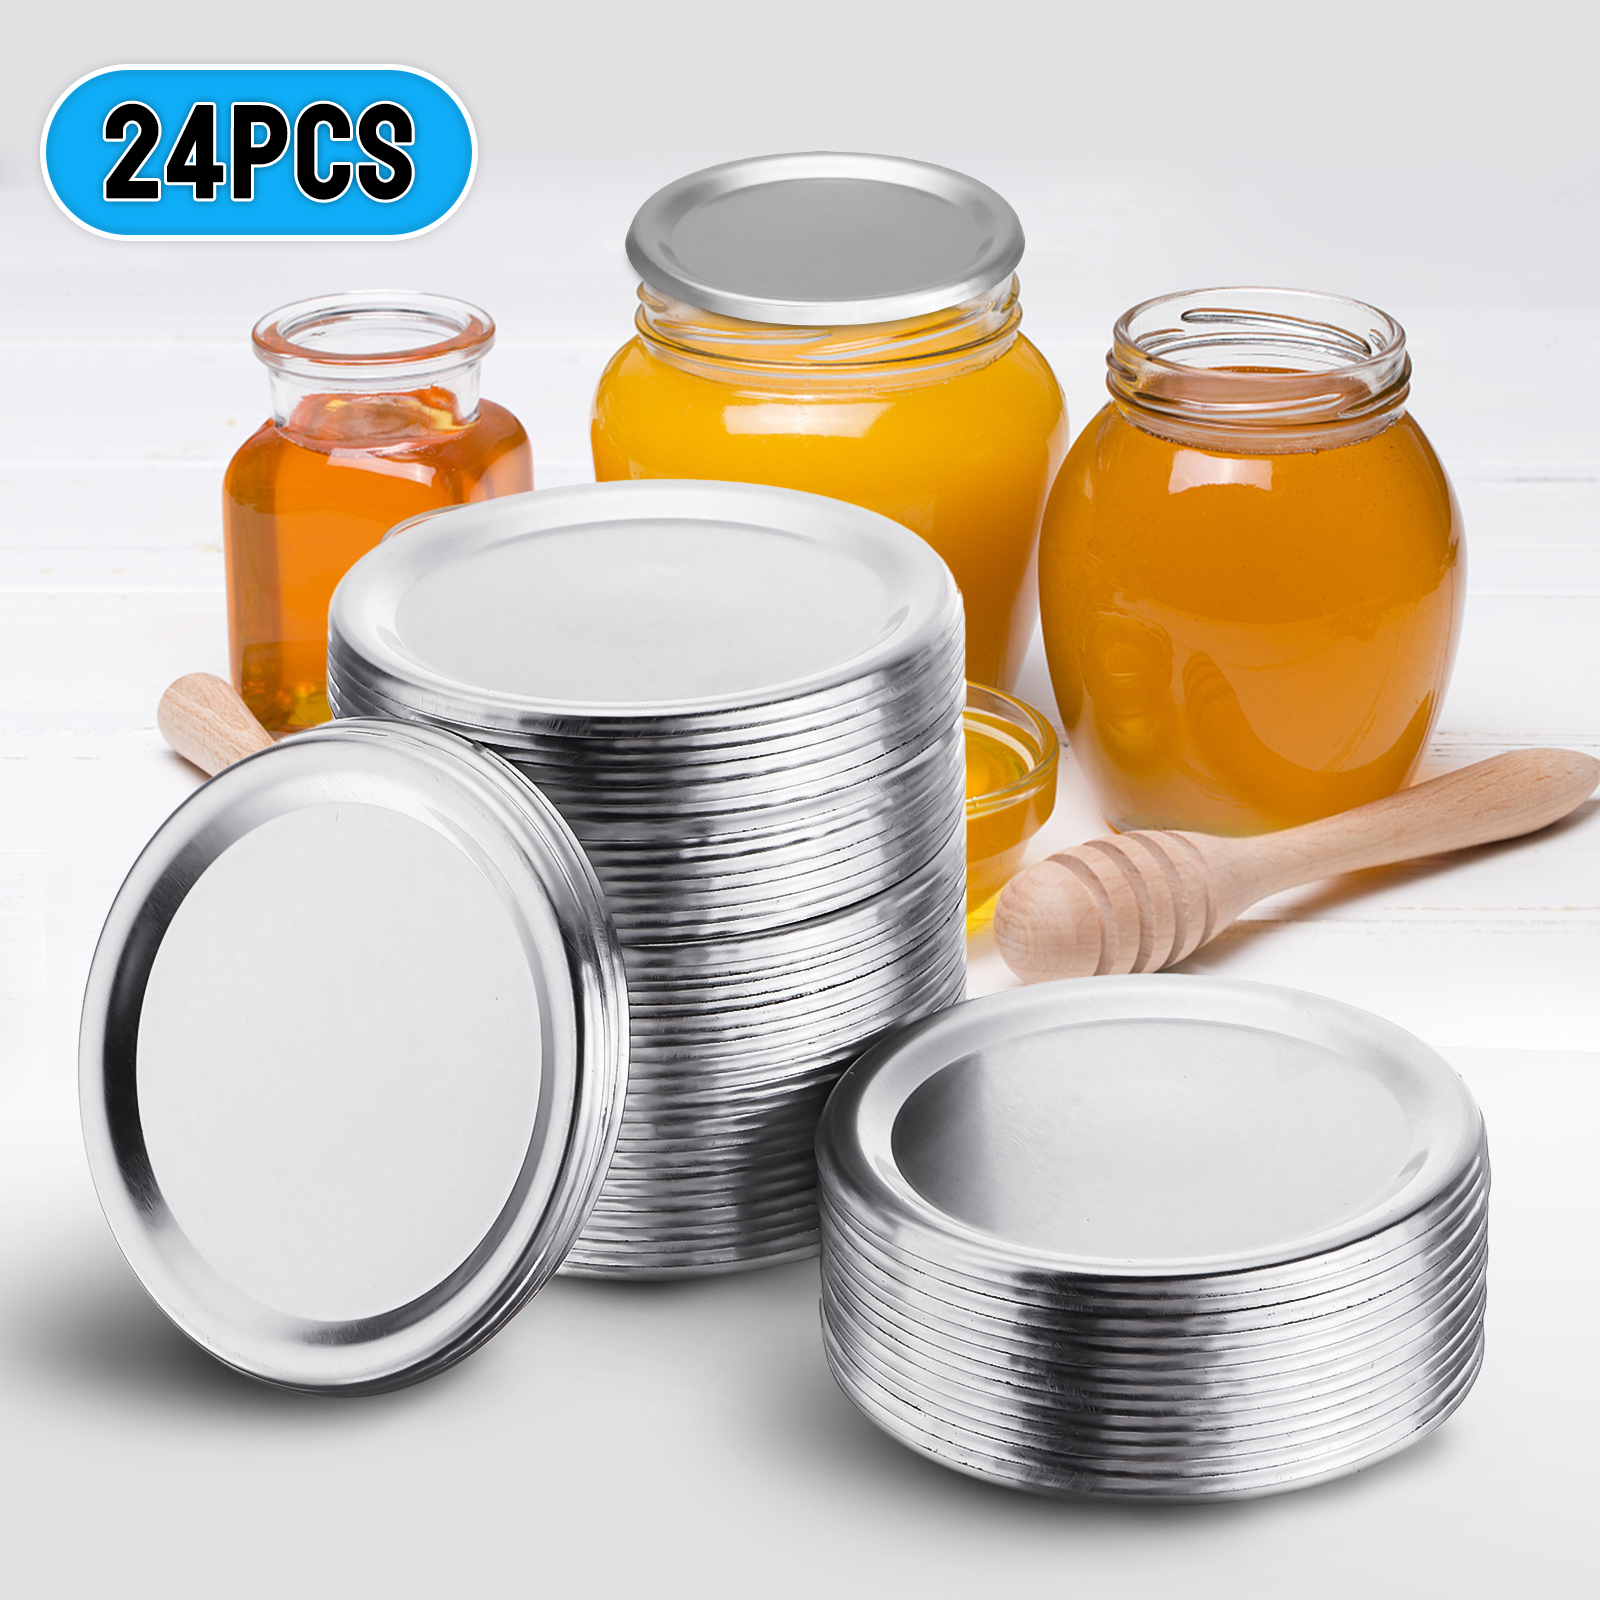 CHARMINER-Canning-Lids-24-Count-Regular-Mouth-Canning-Lids-Canning-Lids-Wide-Mouth-Split-Type-Wide-M-1890729-6